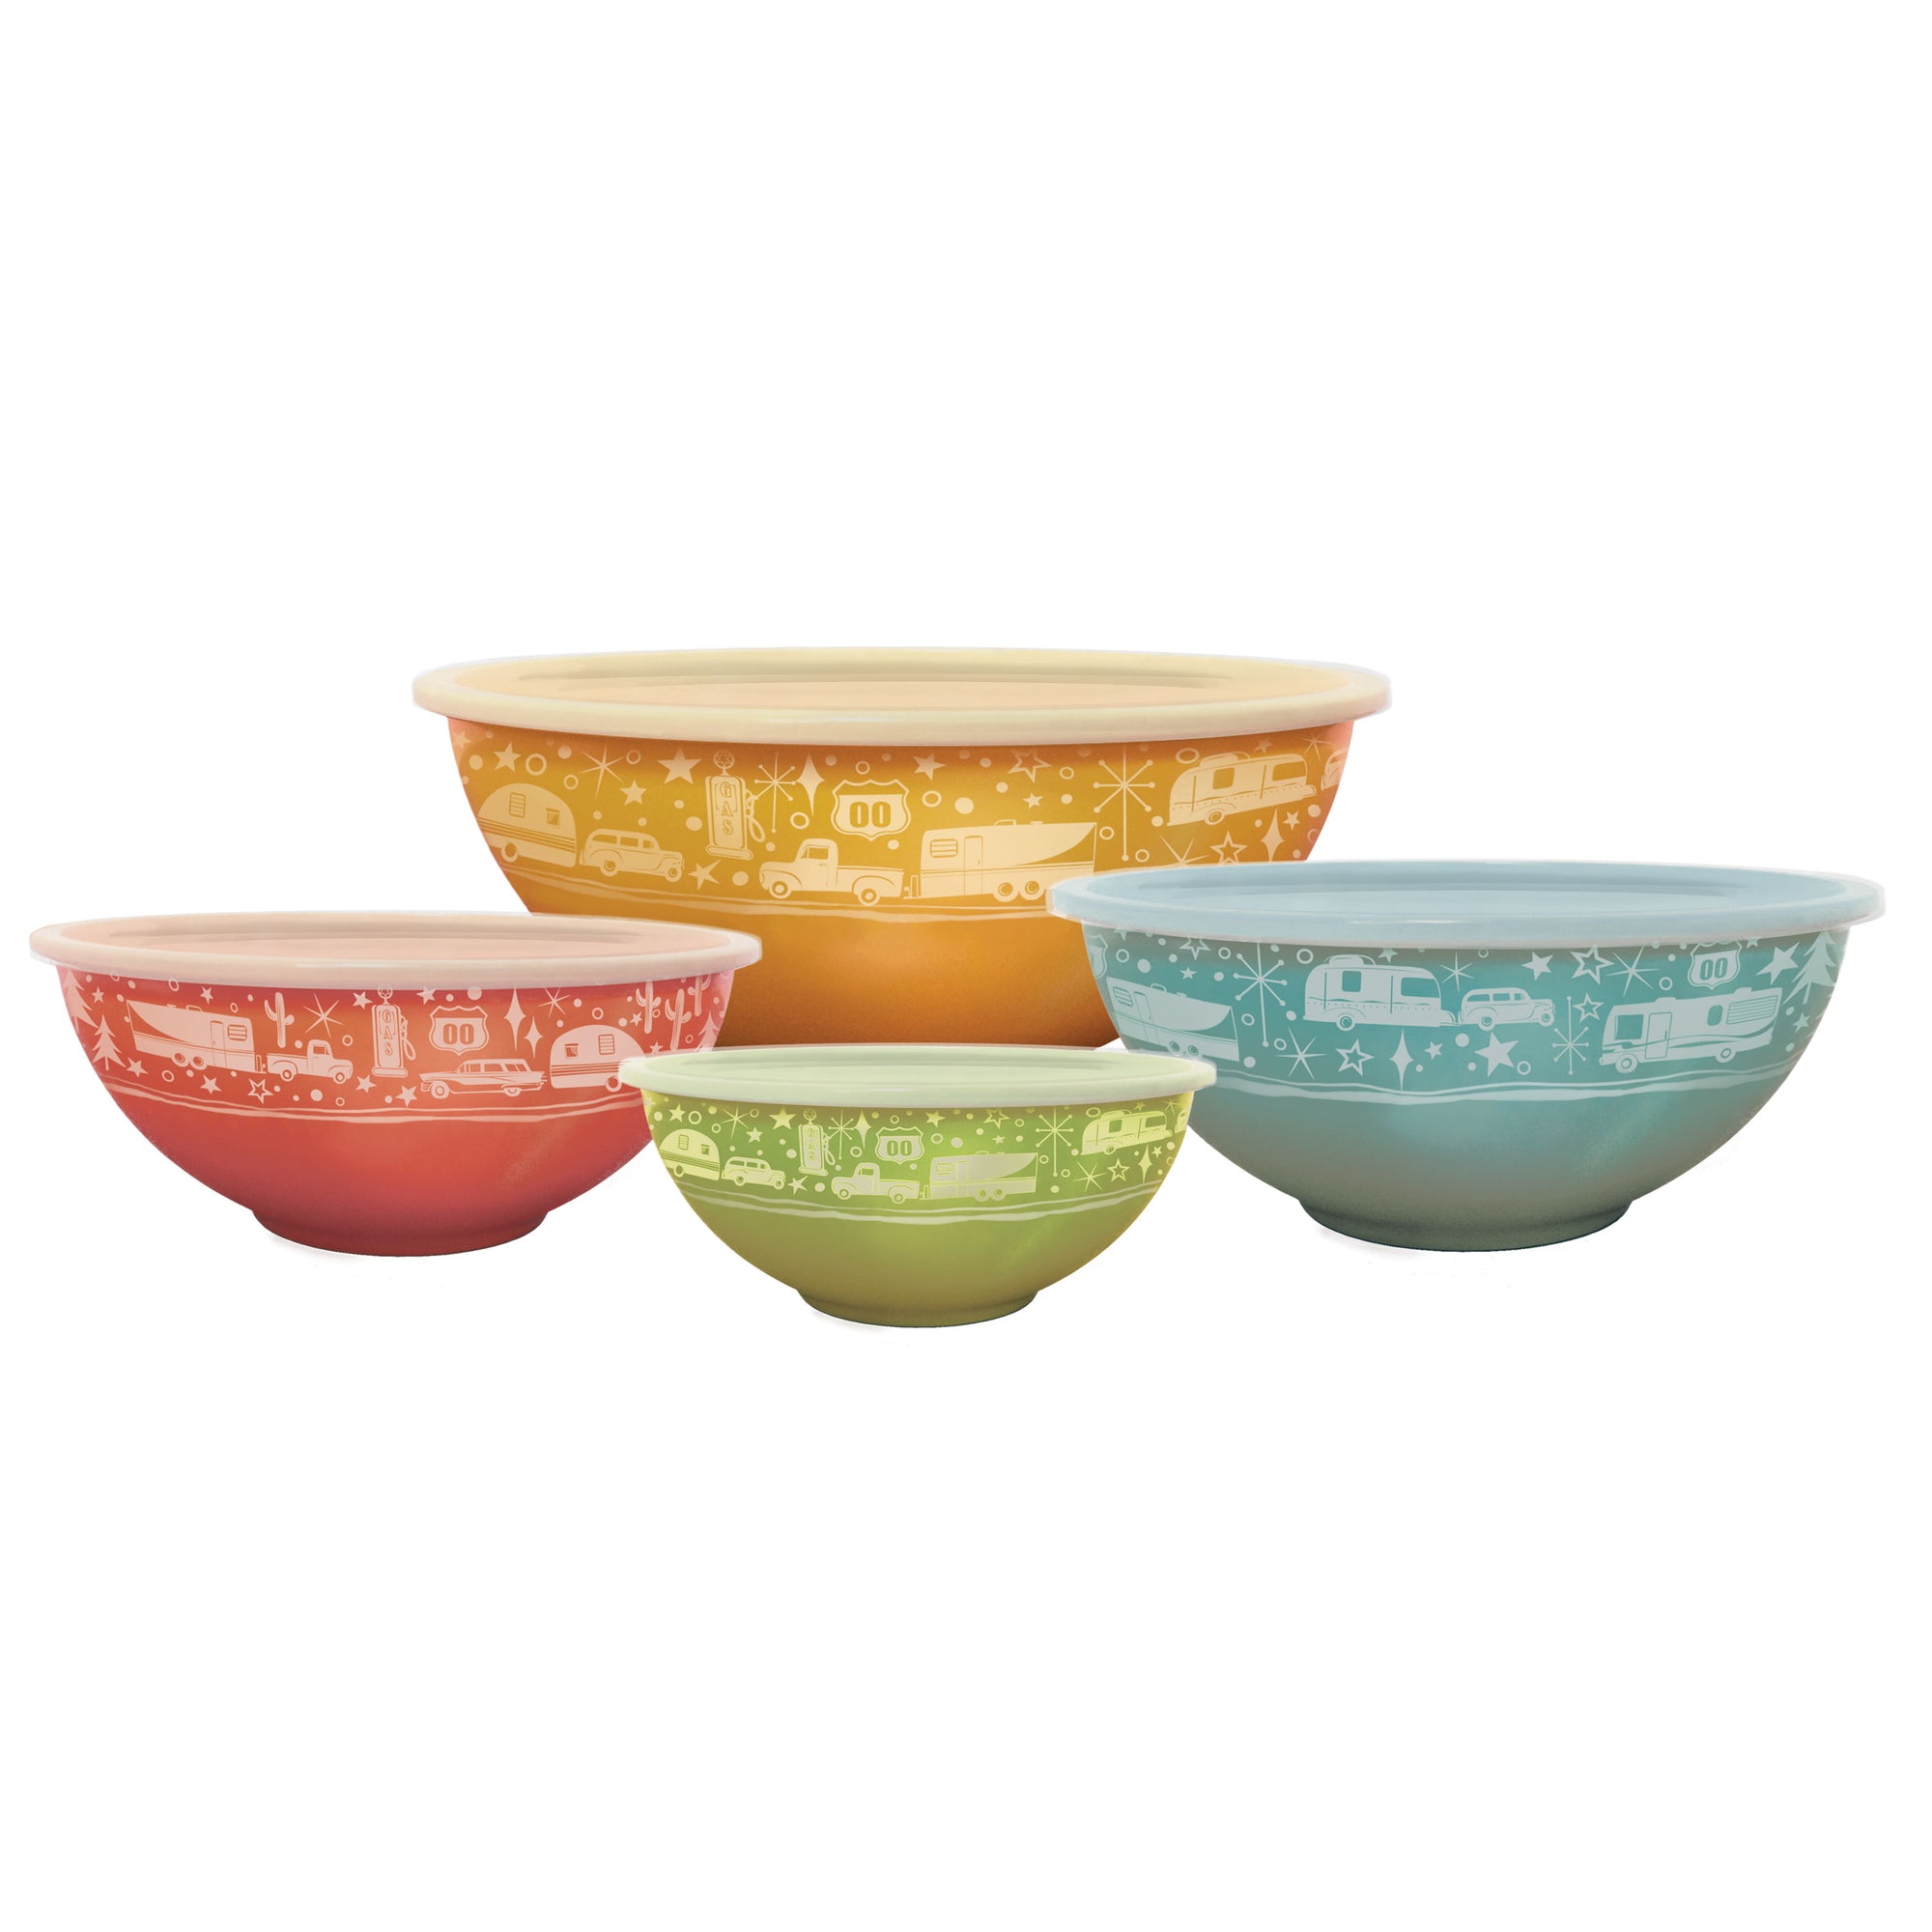 Camp Casual CC-006 Set of 4 Nesting Bowls With Lids